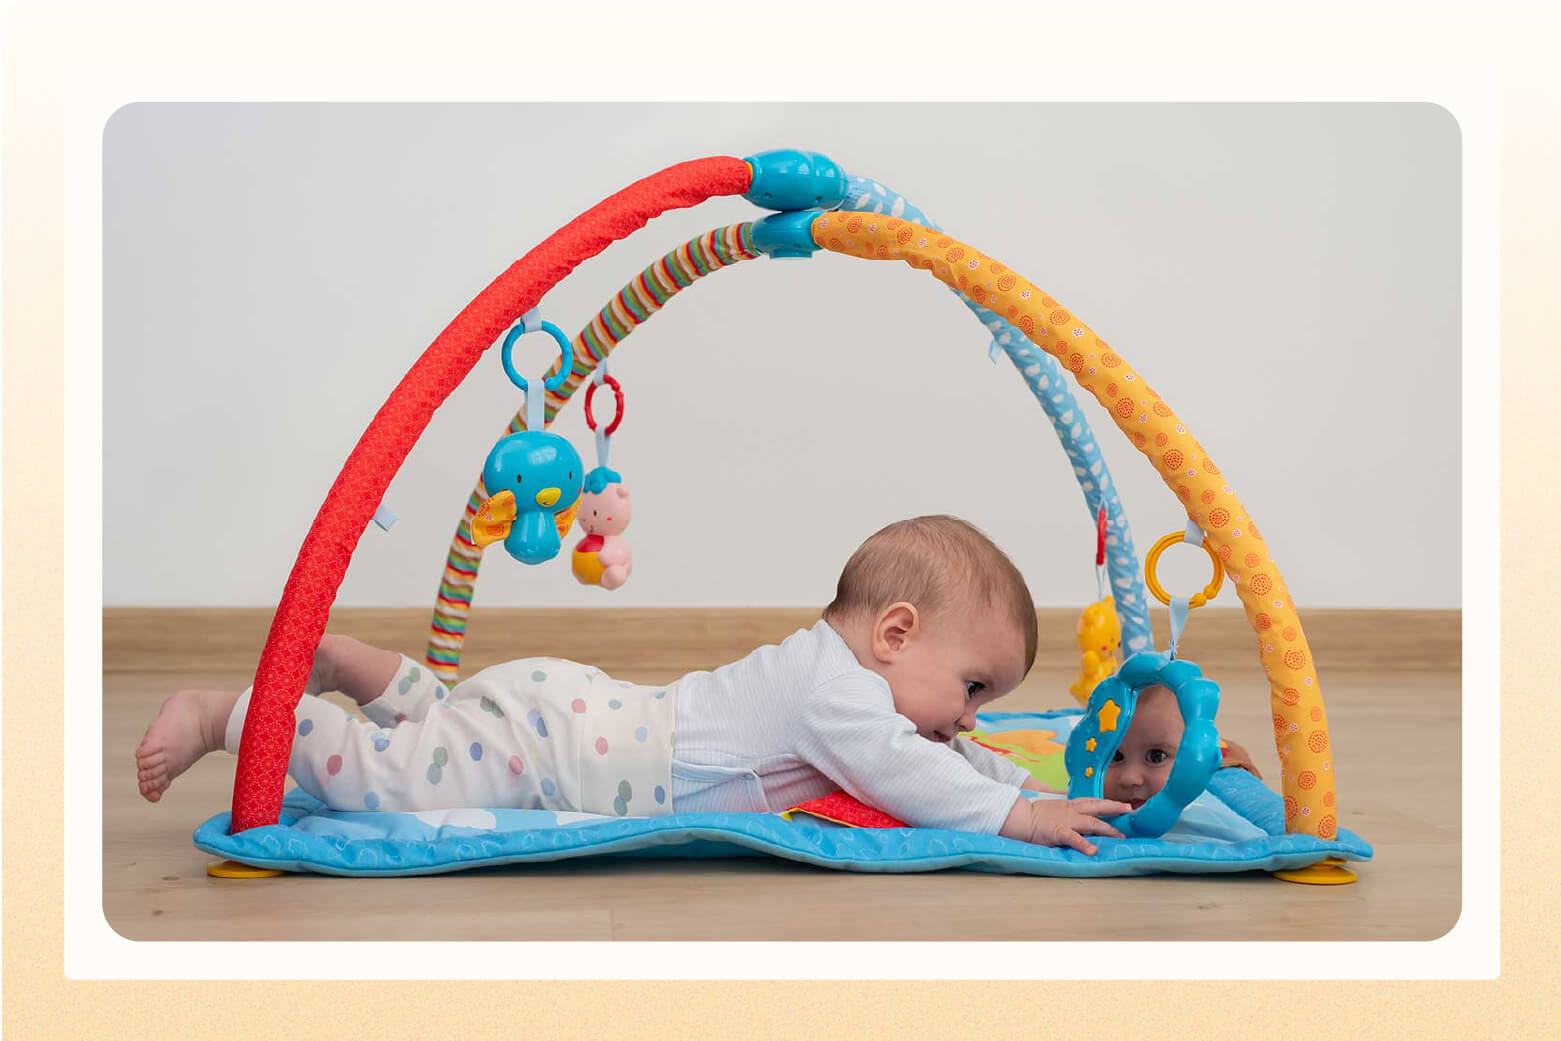 Baby laying on tummy on a playmat with colorful arcs above baby with toys dangling